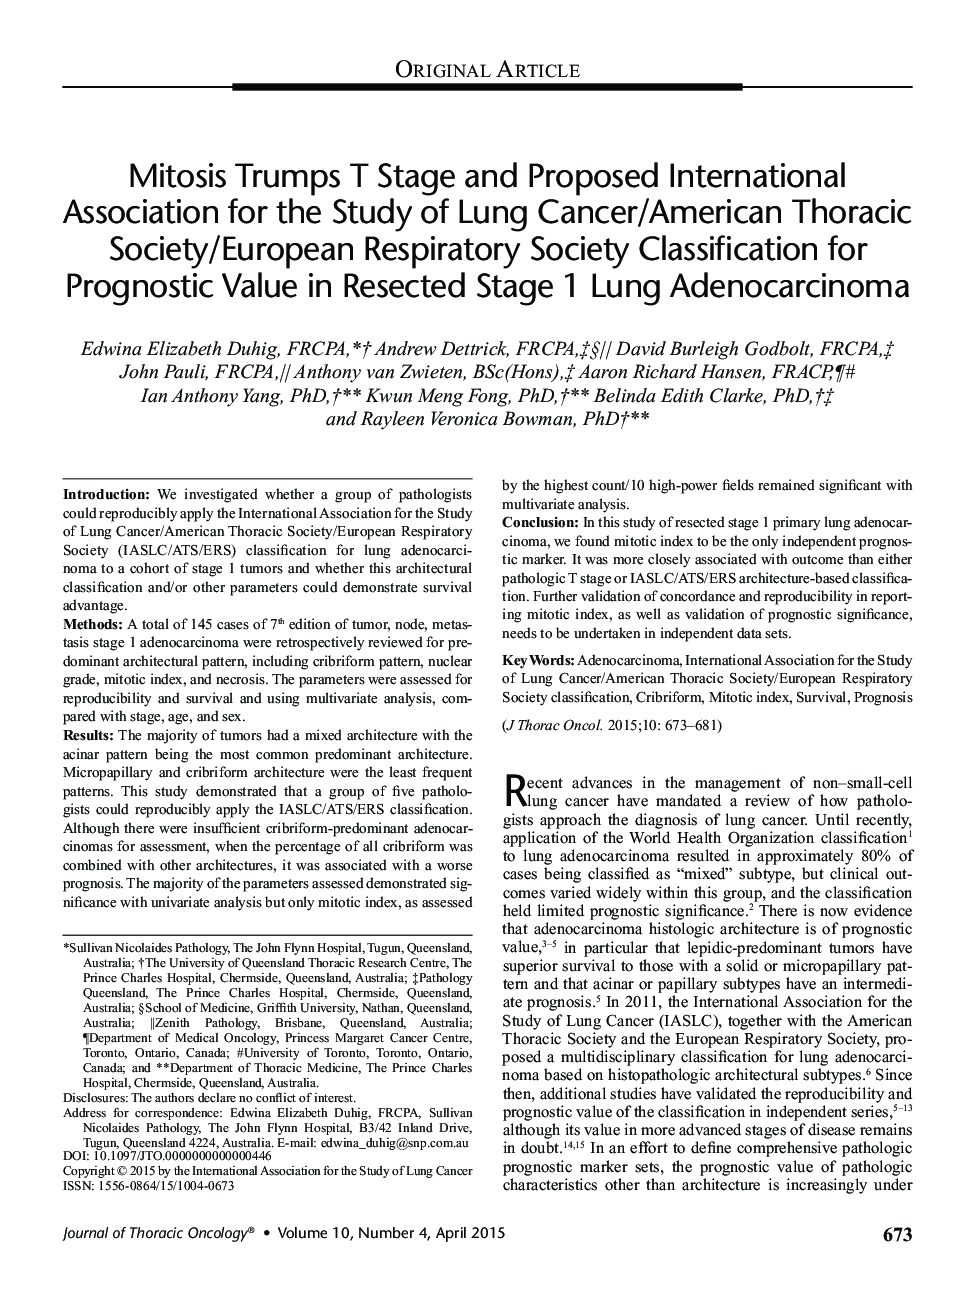 Mitosis Trumps T Stage and Proposed International Association for the Study of Lung Cancer/American Thoracic Society/European Respiratory Society Classification for Prognostic Value in Resected Stage 1 Lung Adenocarcinoma